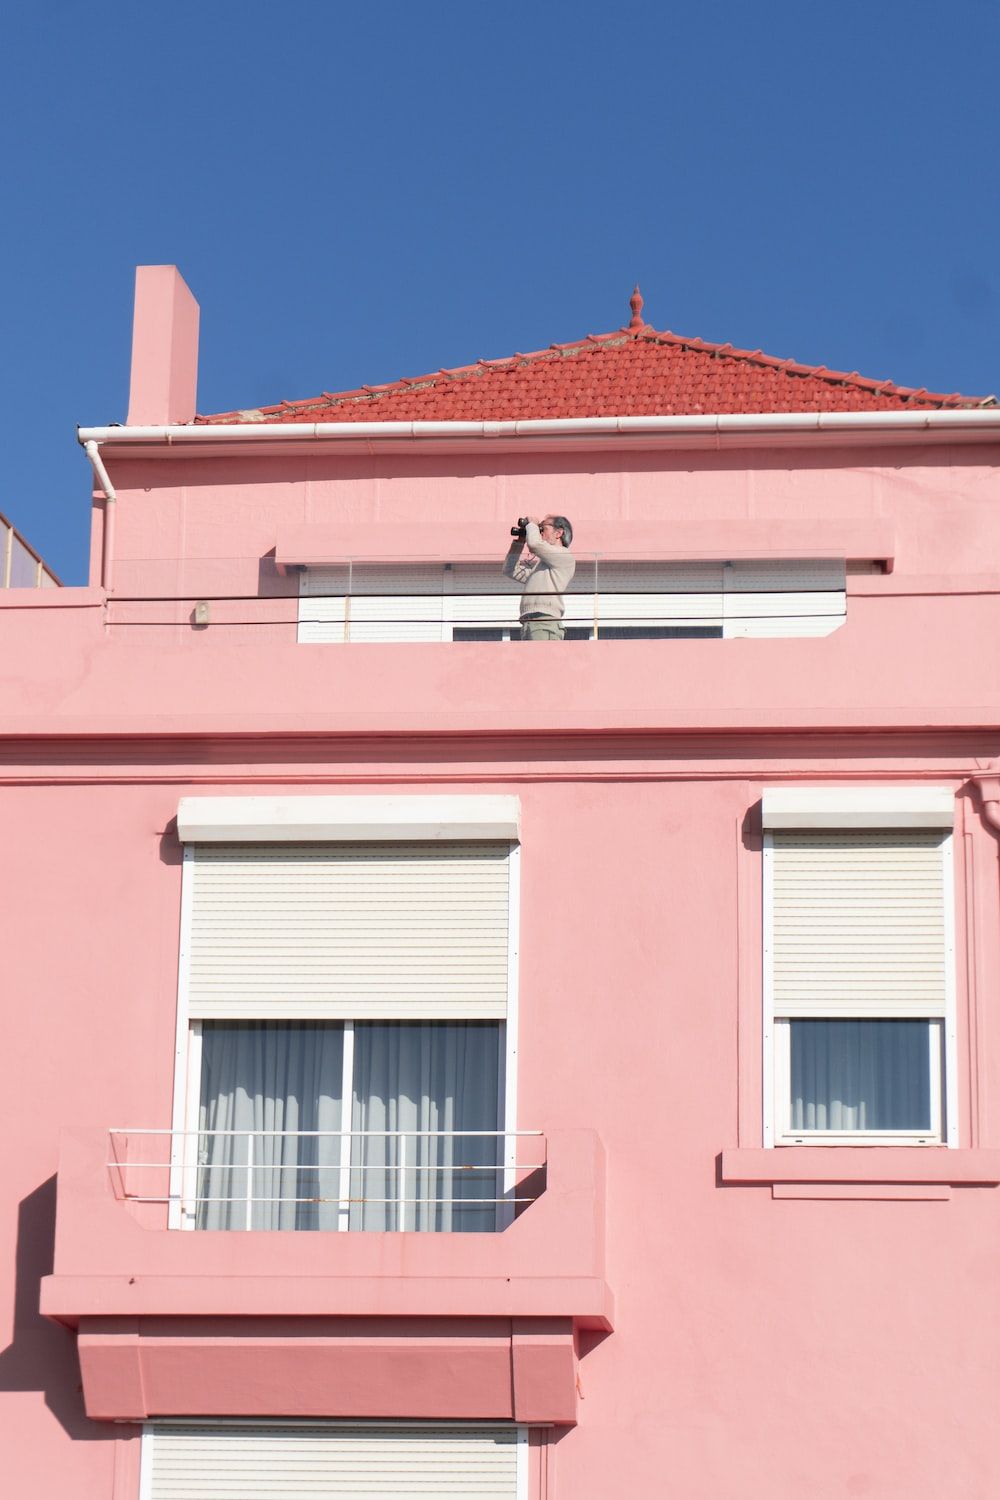 A man is taking a picture from the window of a pink building - Spotify